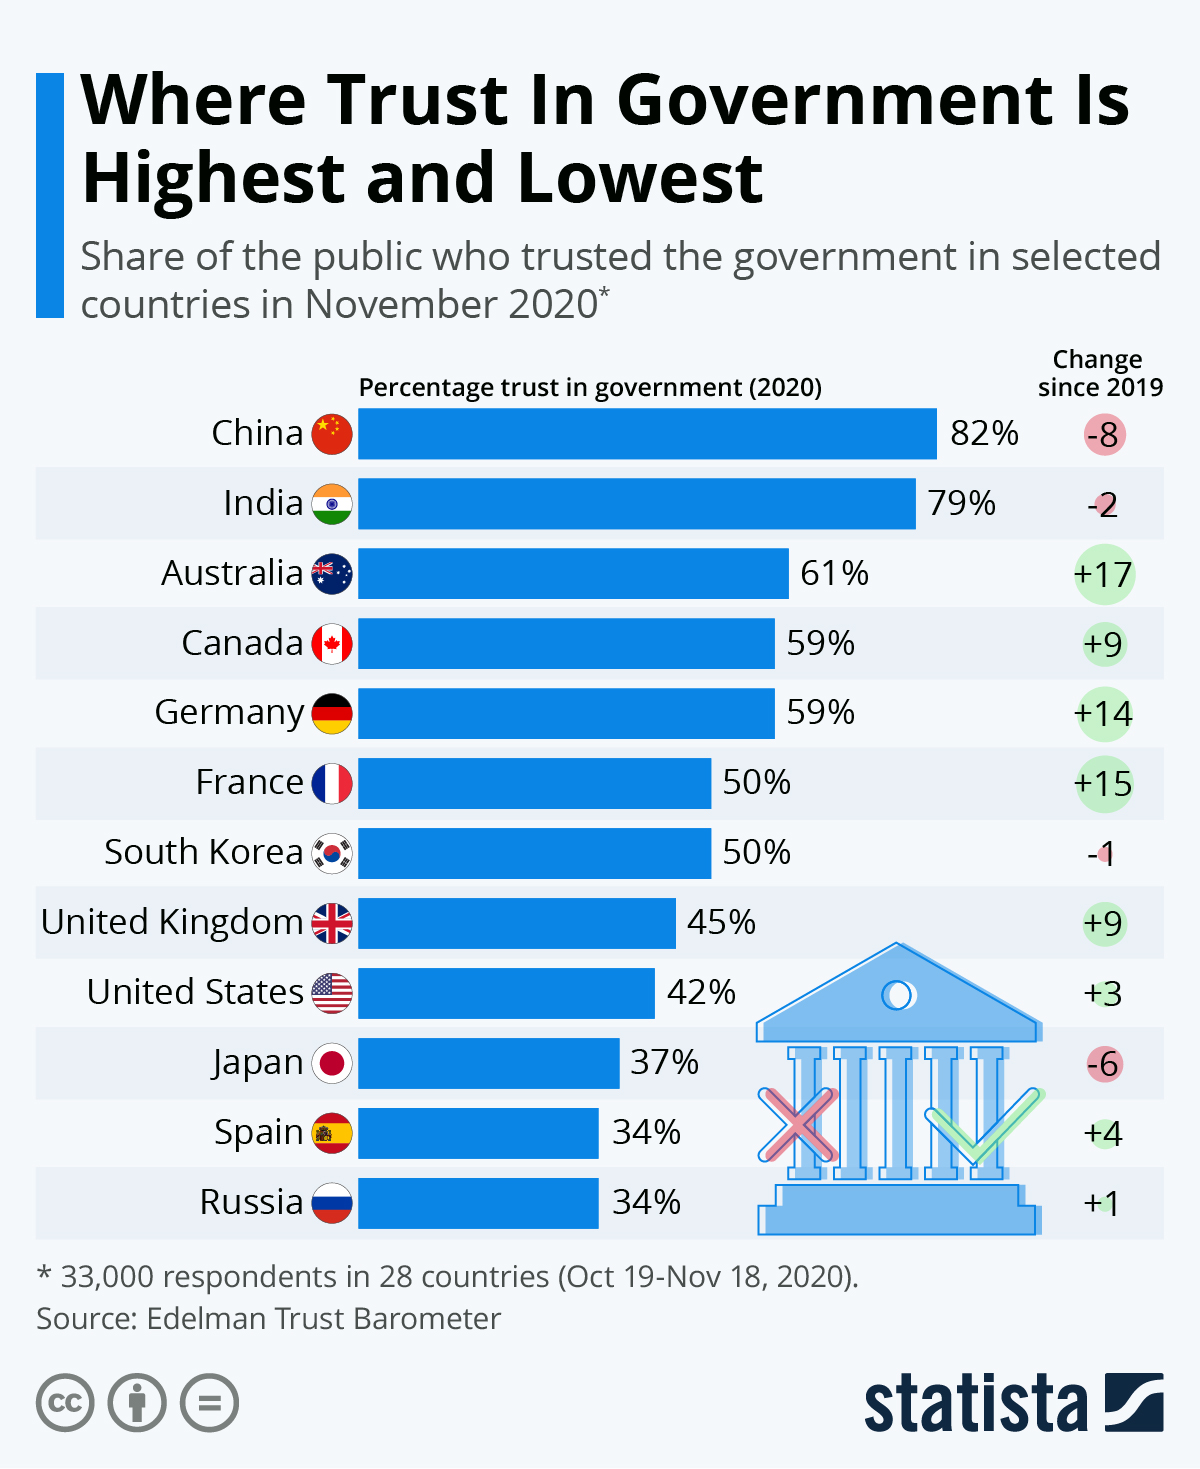 Chinese Government Trusted Most in the World